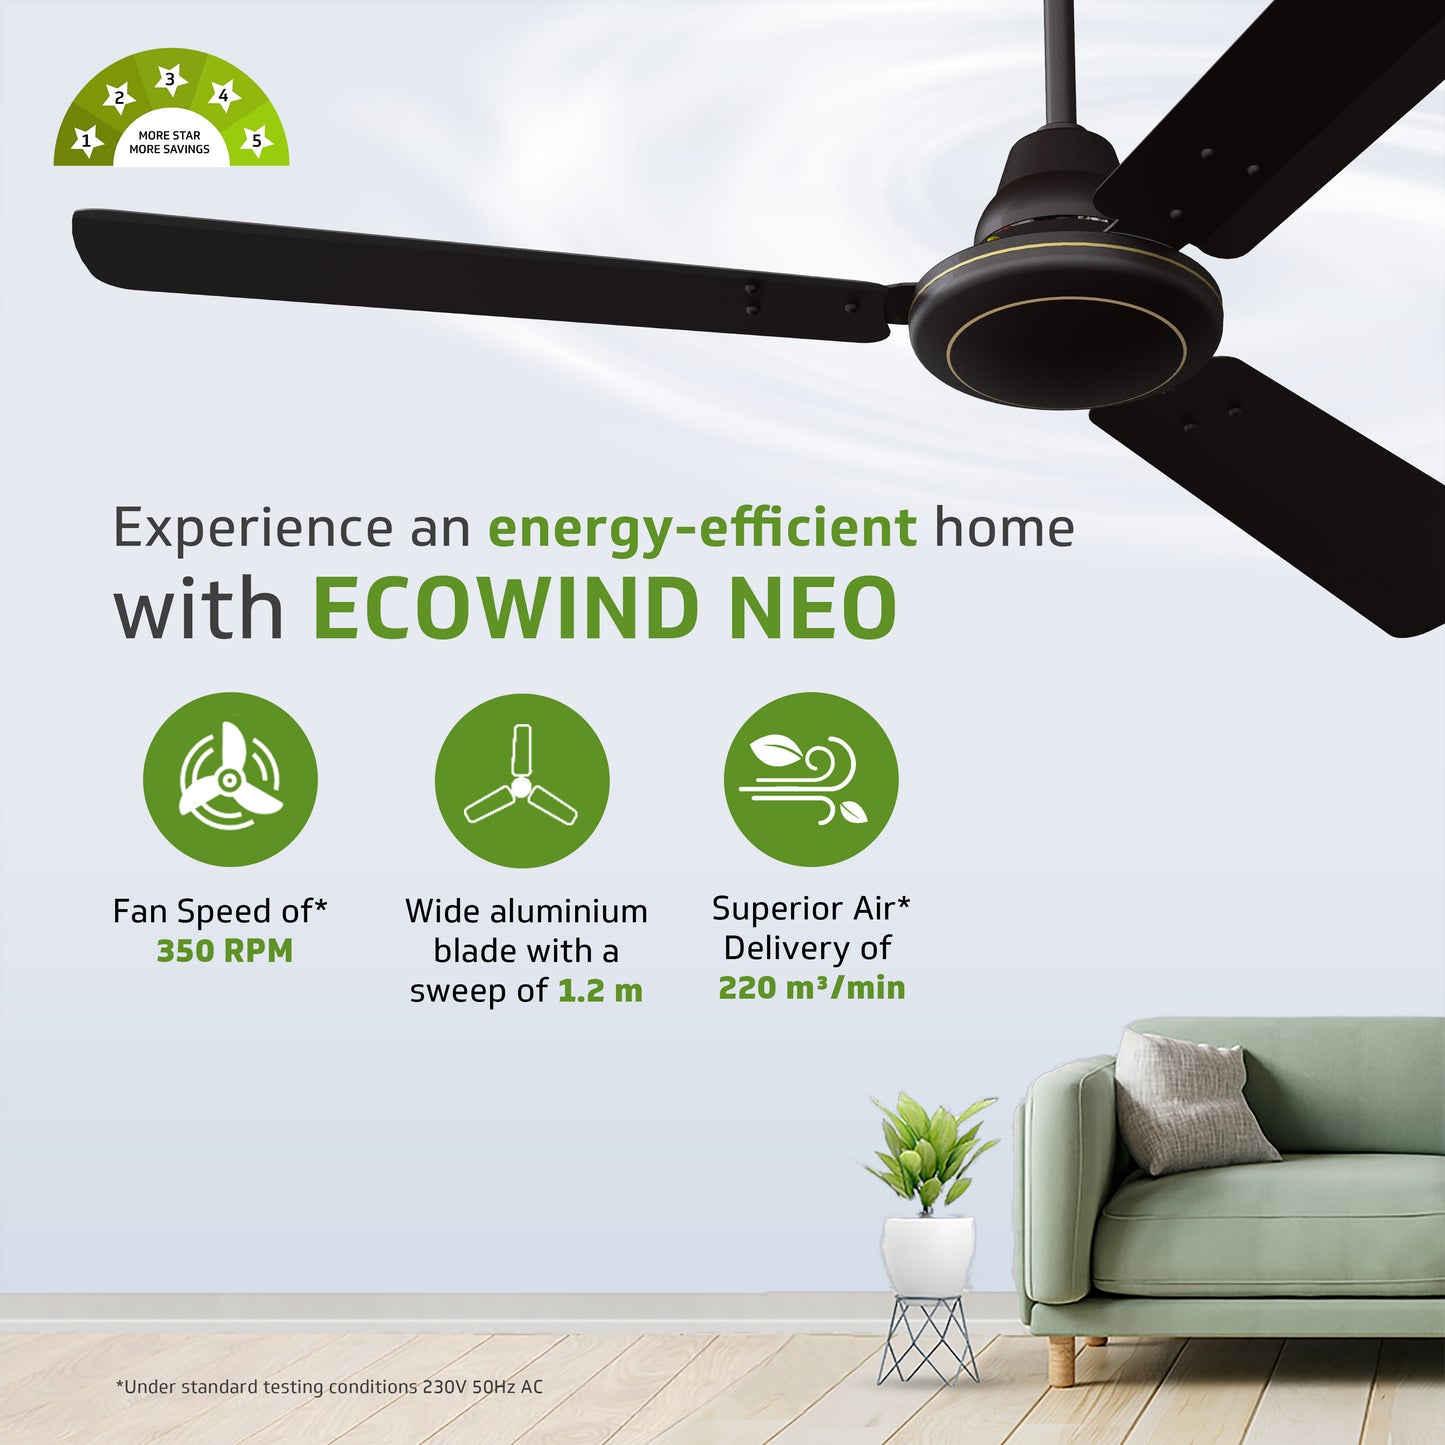 Ecowind Neo BLDC Motor Ceiling Fan, 1.2 m, Matte Brown, 5 Star Rated